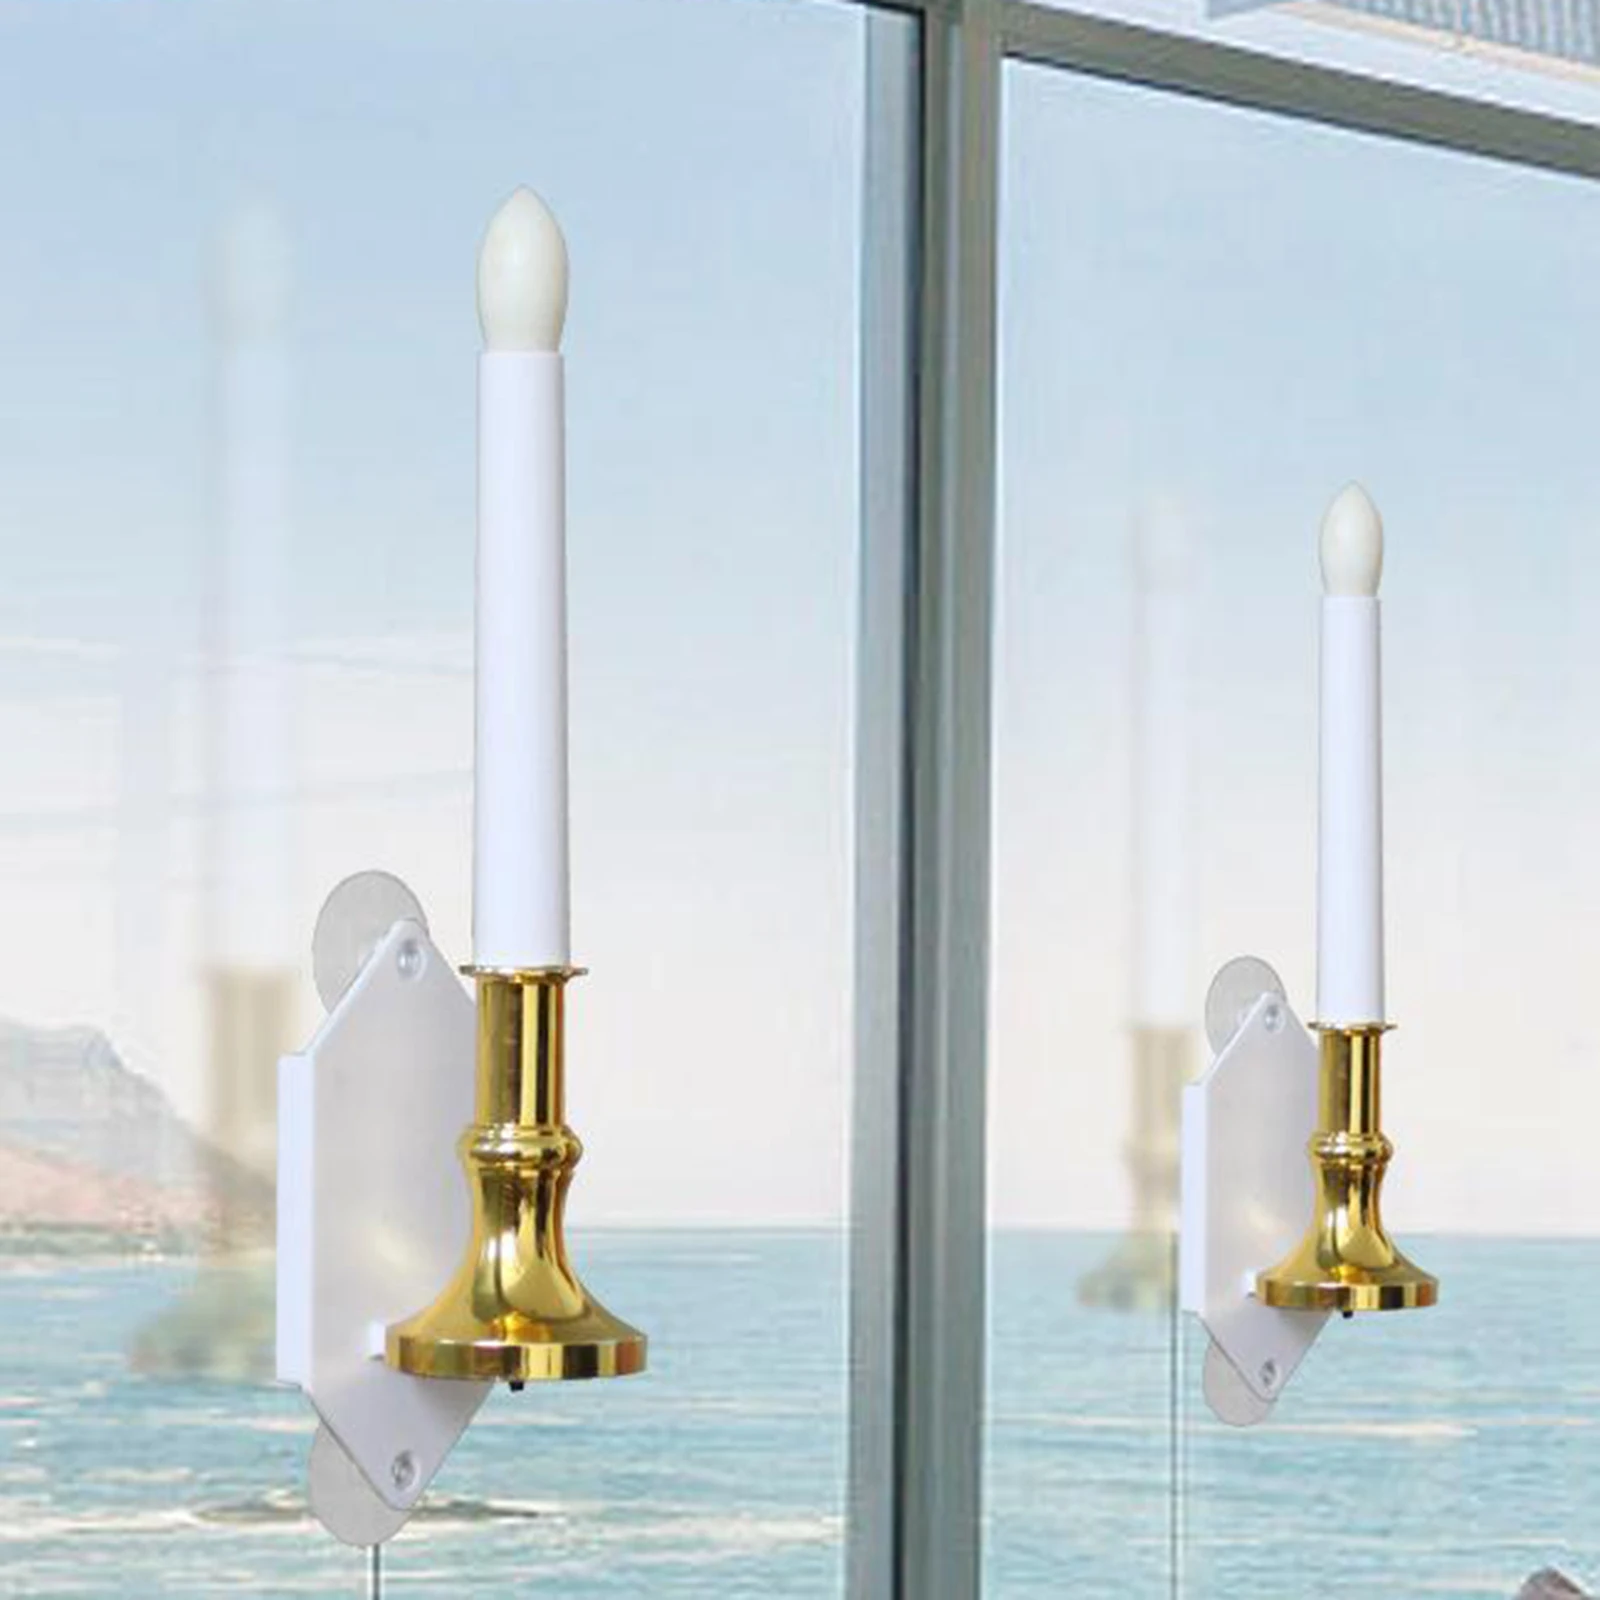 Solar Powered Window Candles Lights Flameless Taper Candles Warm White Candles with Suction Cups, Garden Yard Christmas Decor